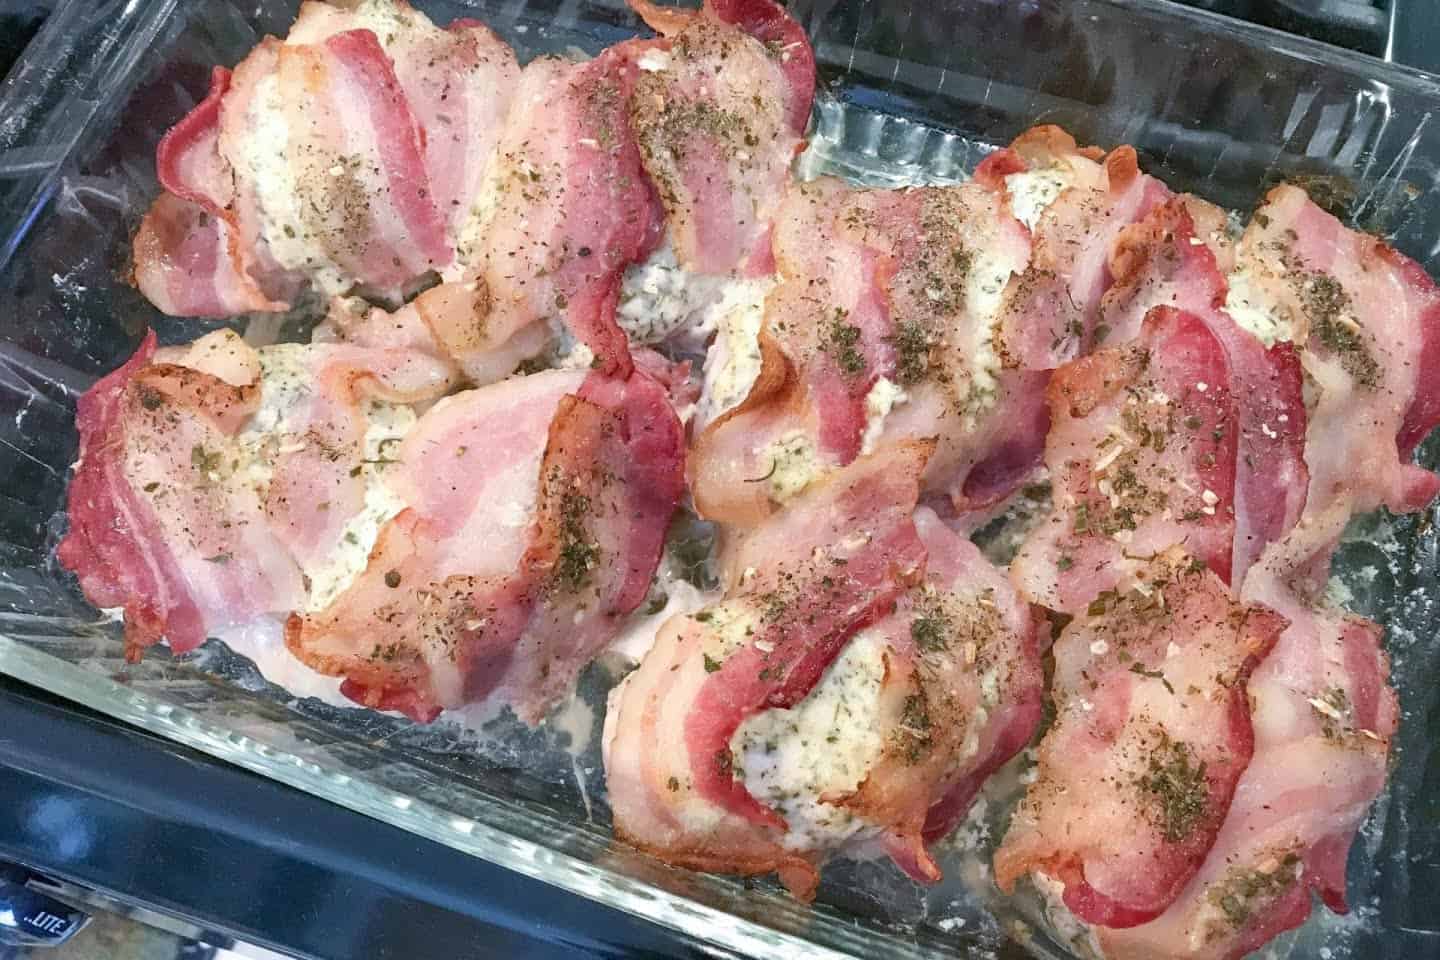 Baked Chicken with Bacon on top